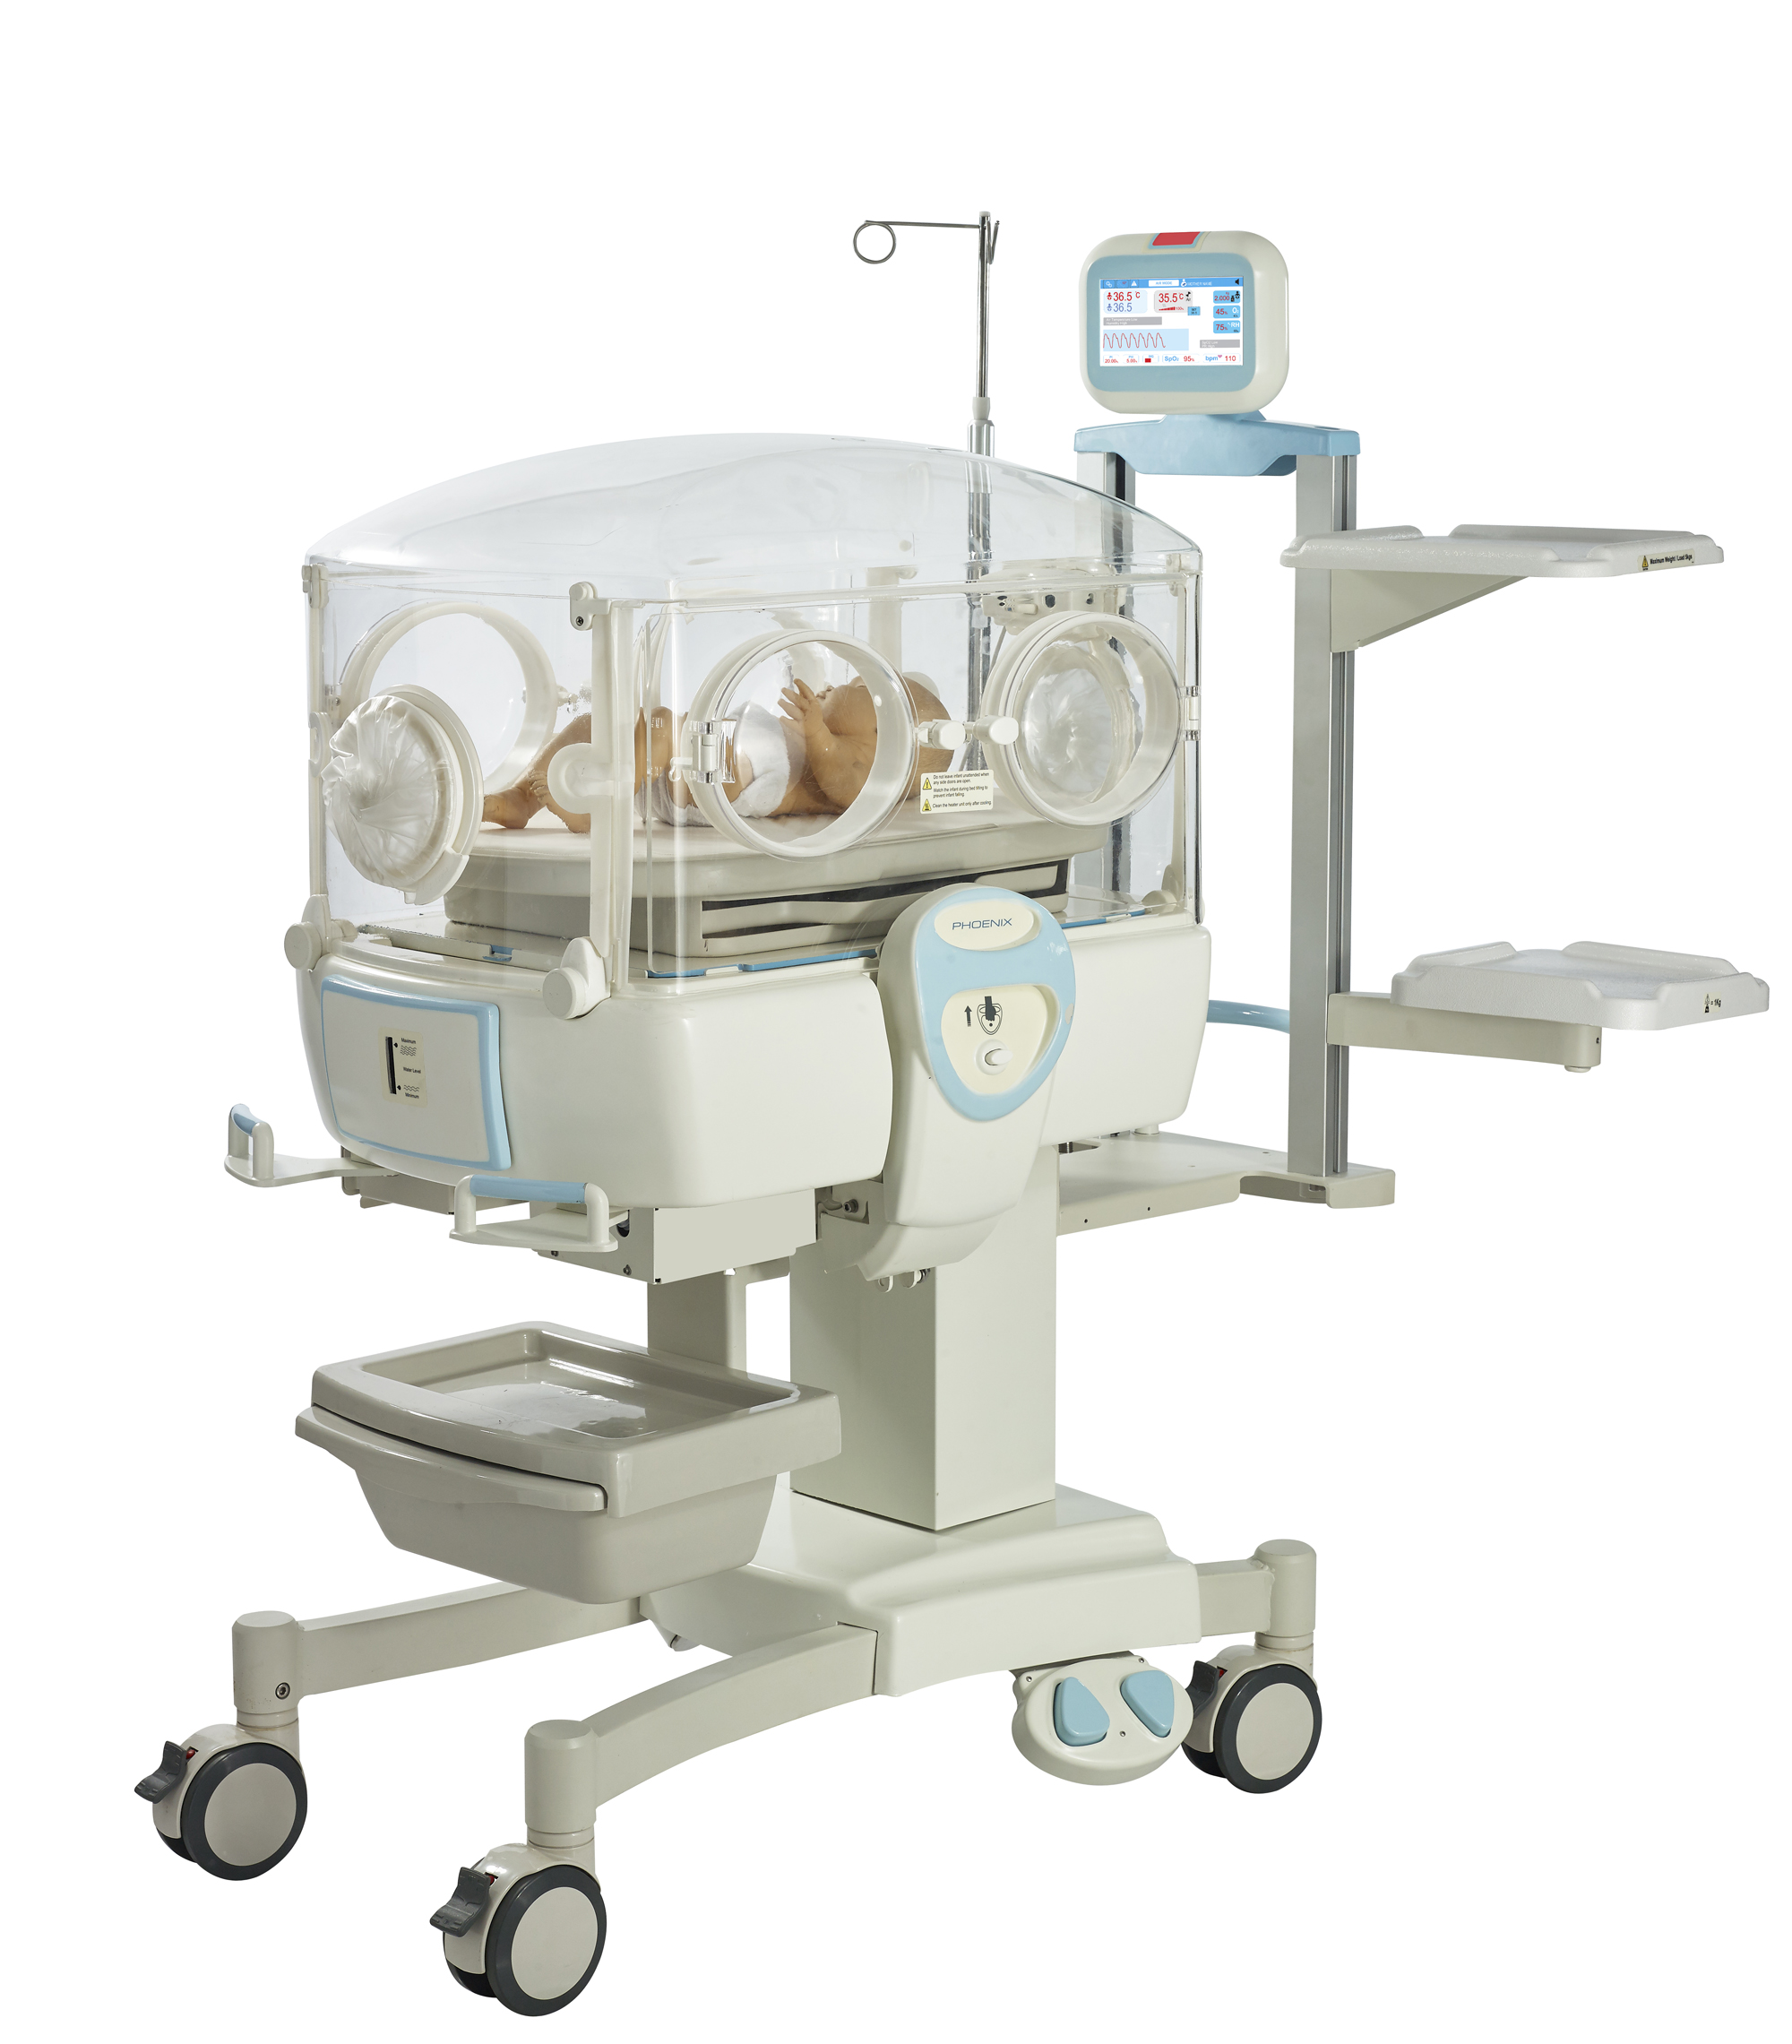 Neonatal Care Equipment Market 2021 | Global Emerging Technologies, Industry Demand, CAGR Status, Global Competitors, Top Players and Future Scope by 2031